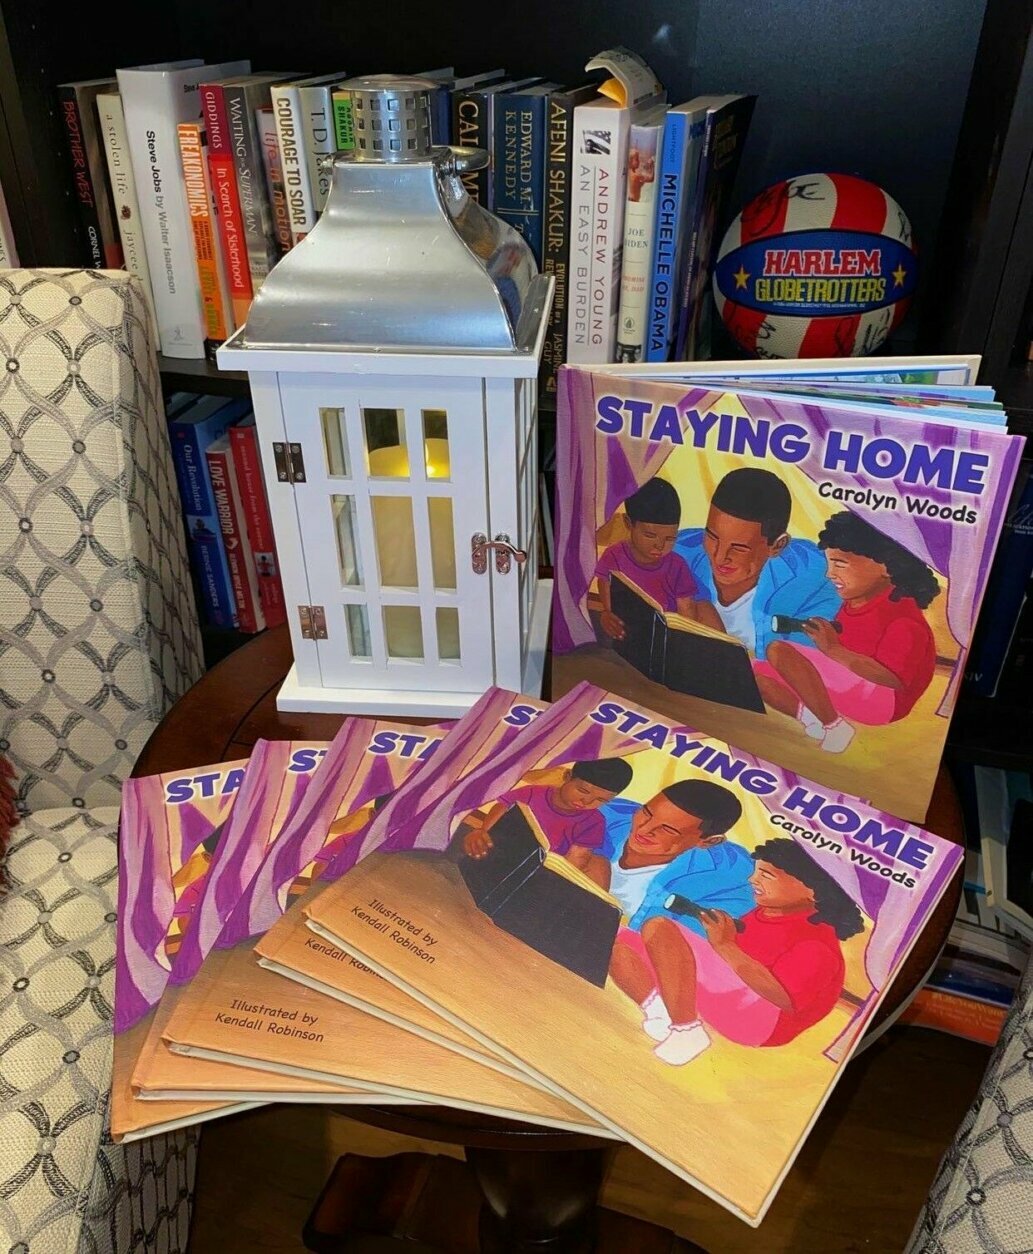 <p>&#8220;Staying Home&#8221; by Carolyn Woods and illustrated by Kendall Robinson. (Courtesy Kendall Robinson)</p>
